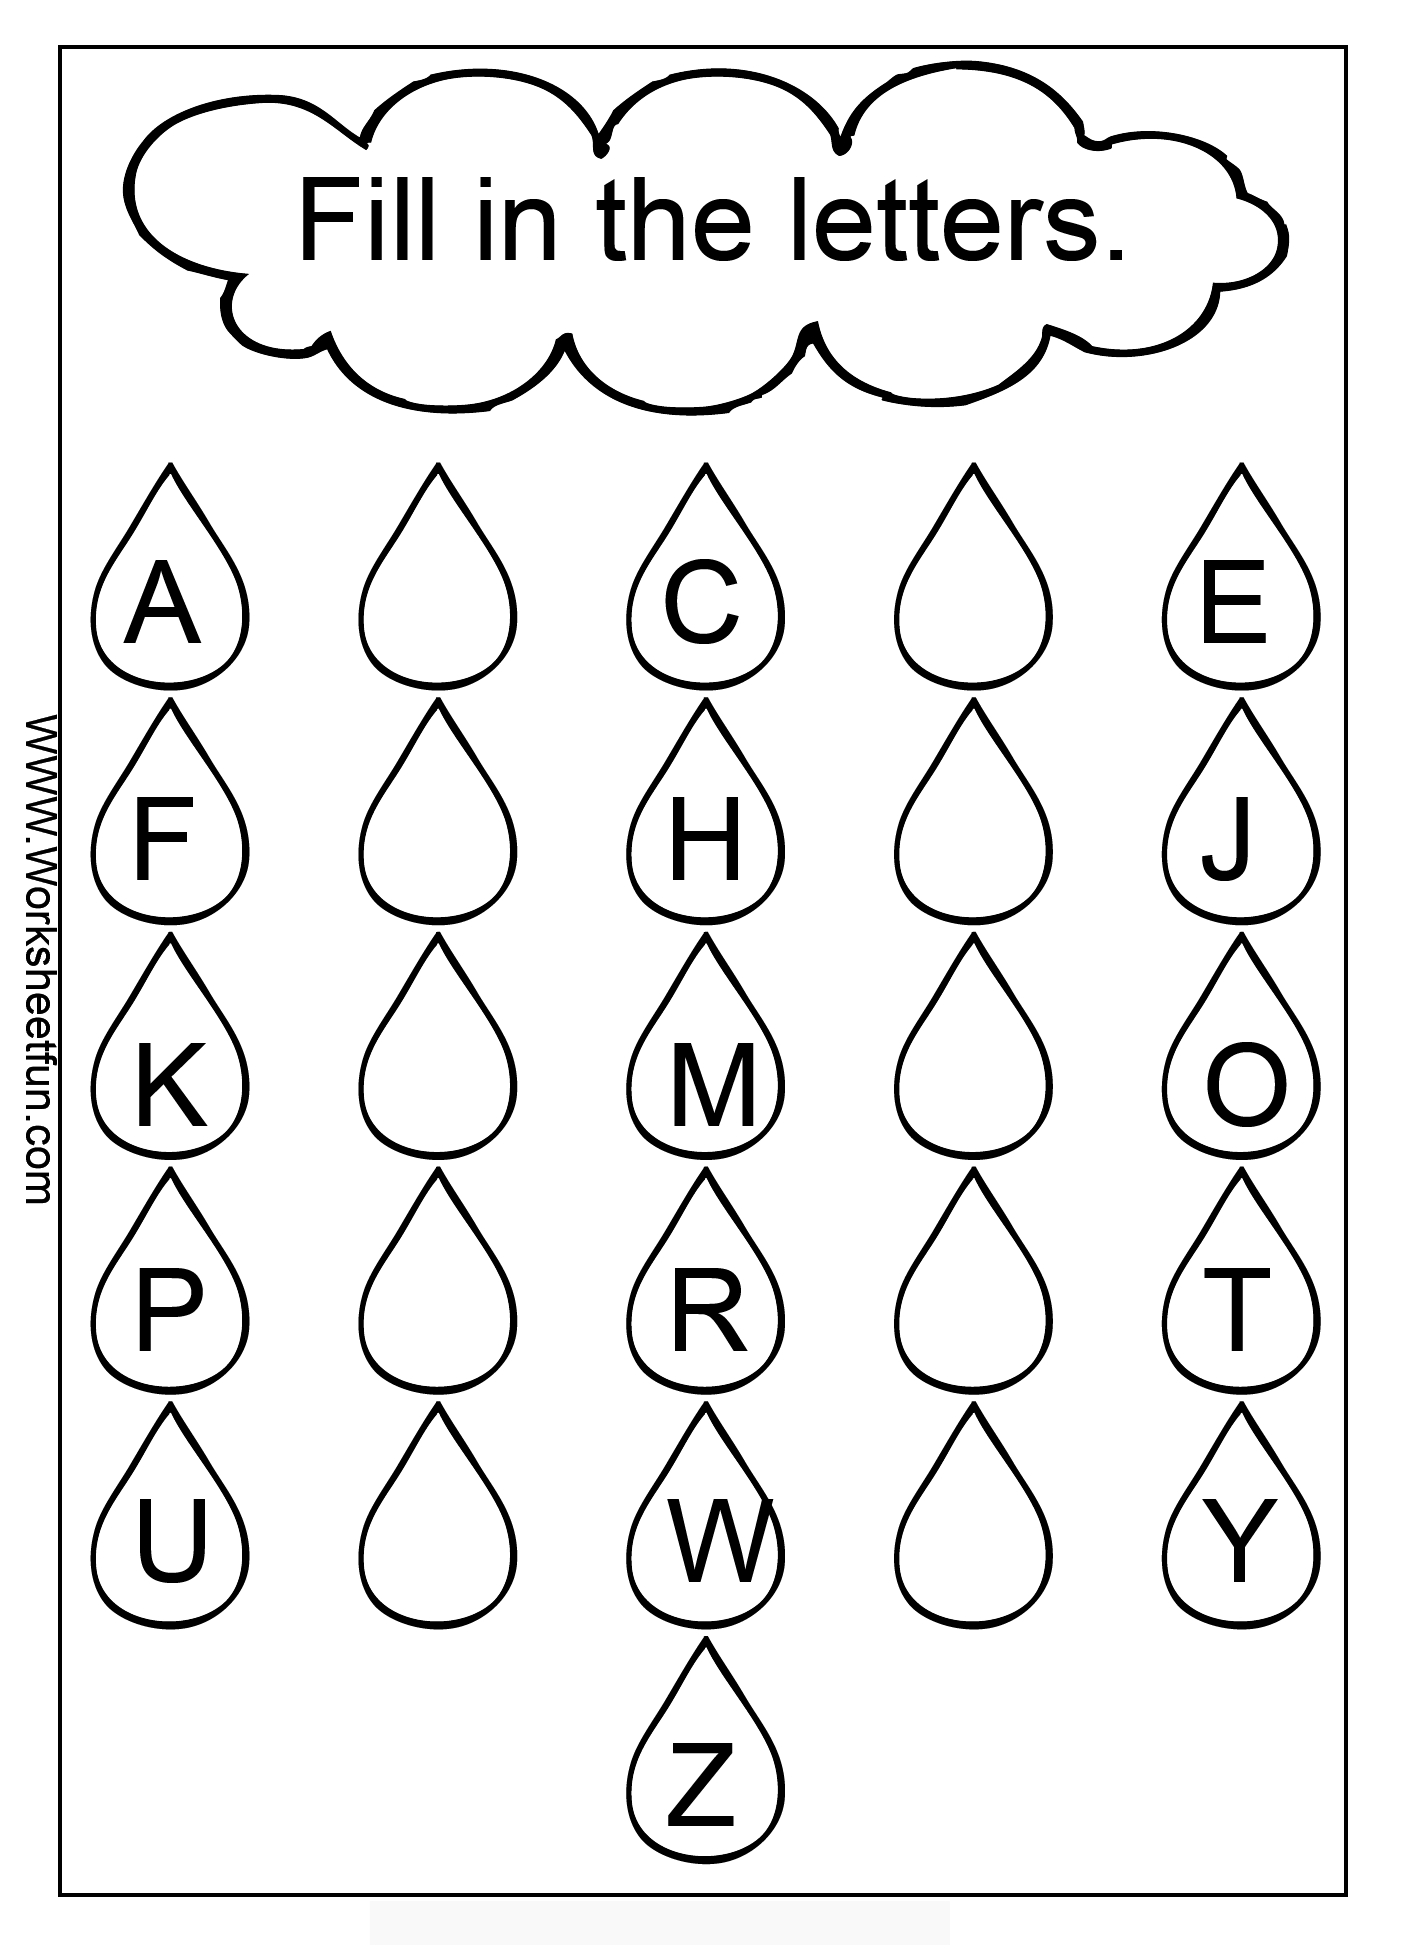 Letters -Missing Letters / Free Printable Worksheets – Worksheetfun - Free Printable Alphabet Worksheets For Grade 1